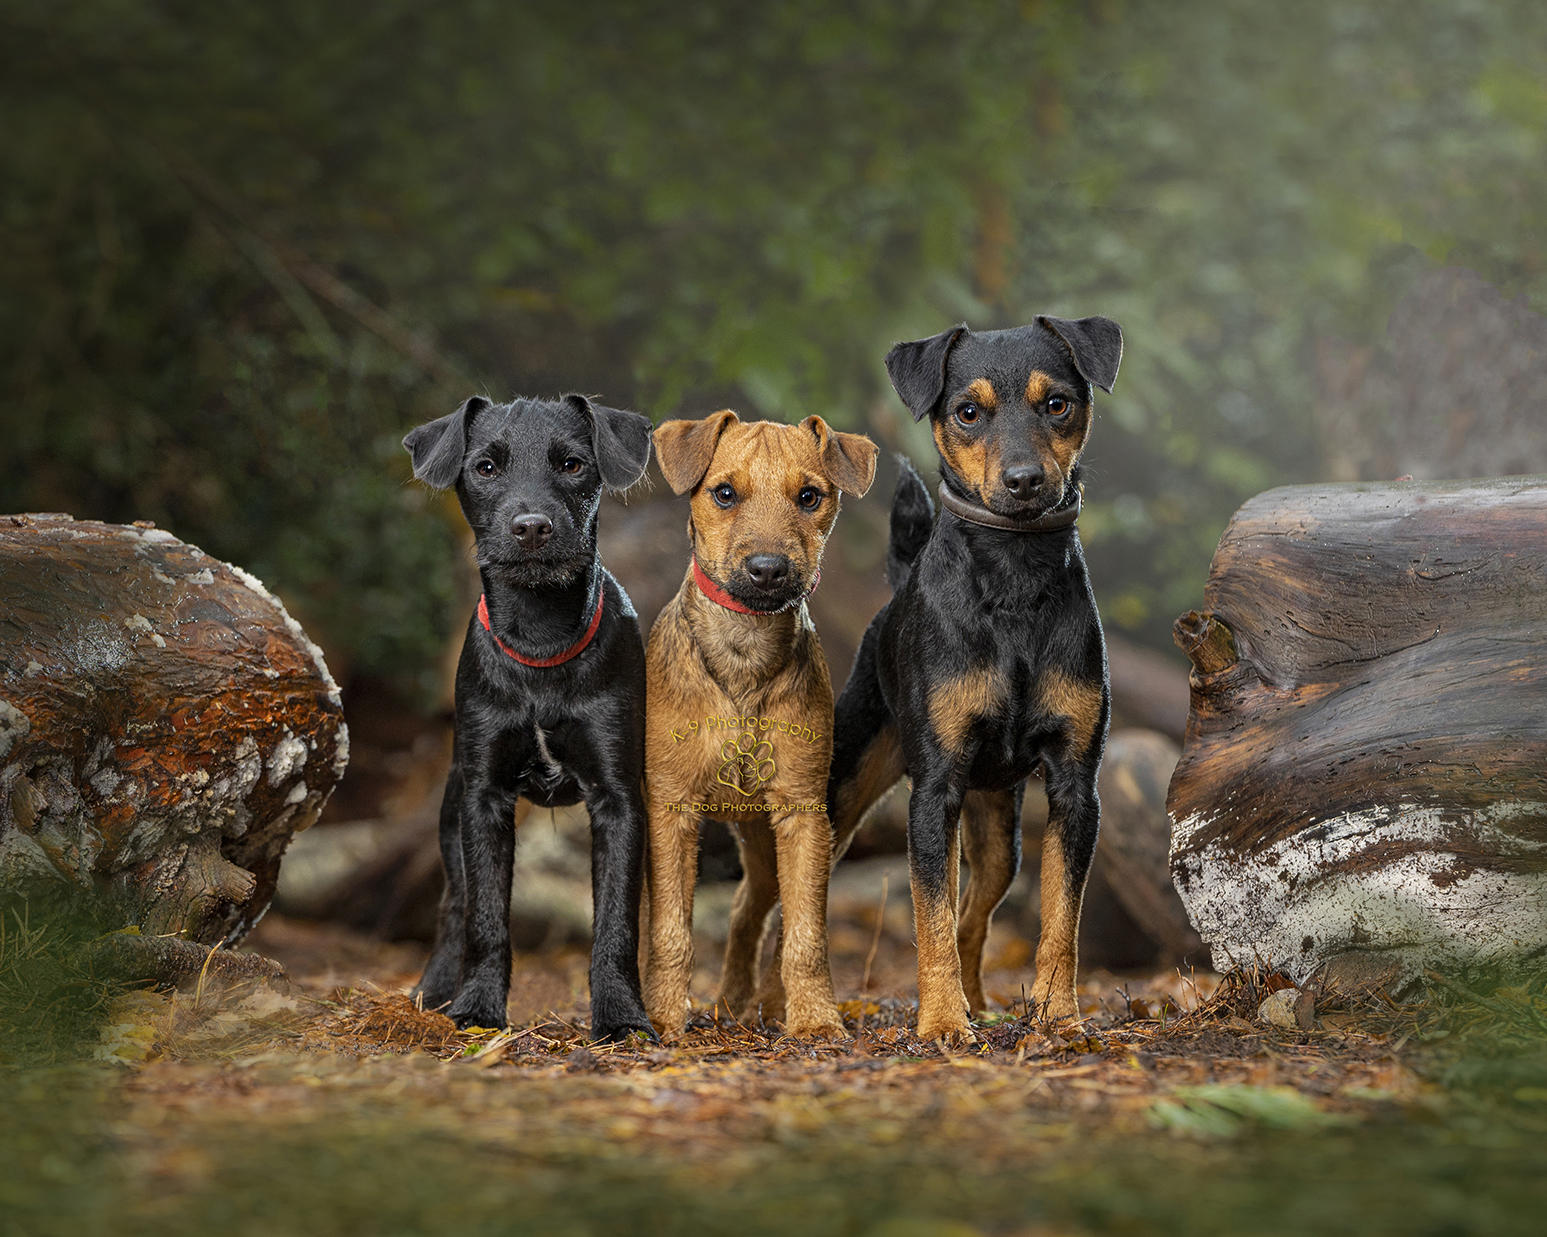 Award winning location Dog Photography from Bedfordshire Dog photographer Adrian Bullers